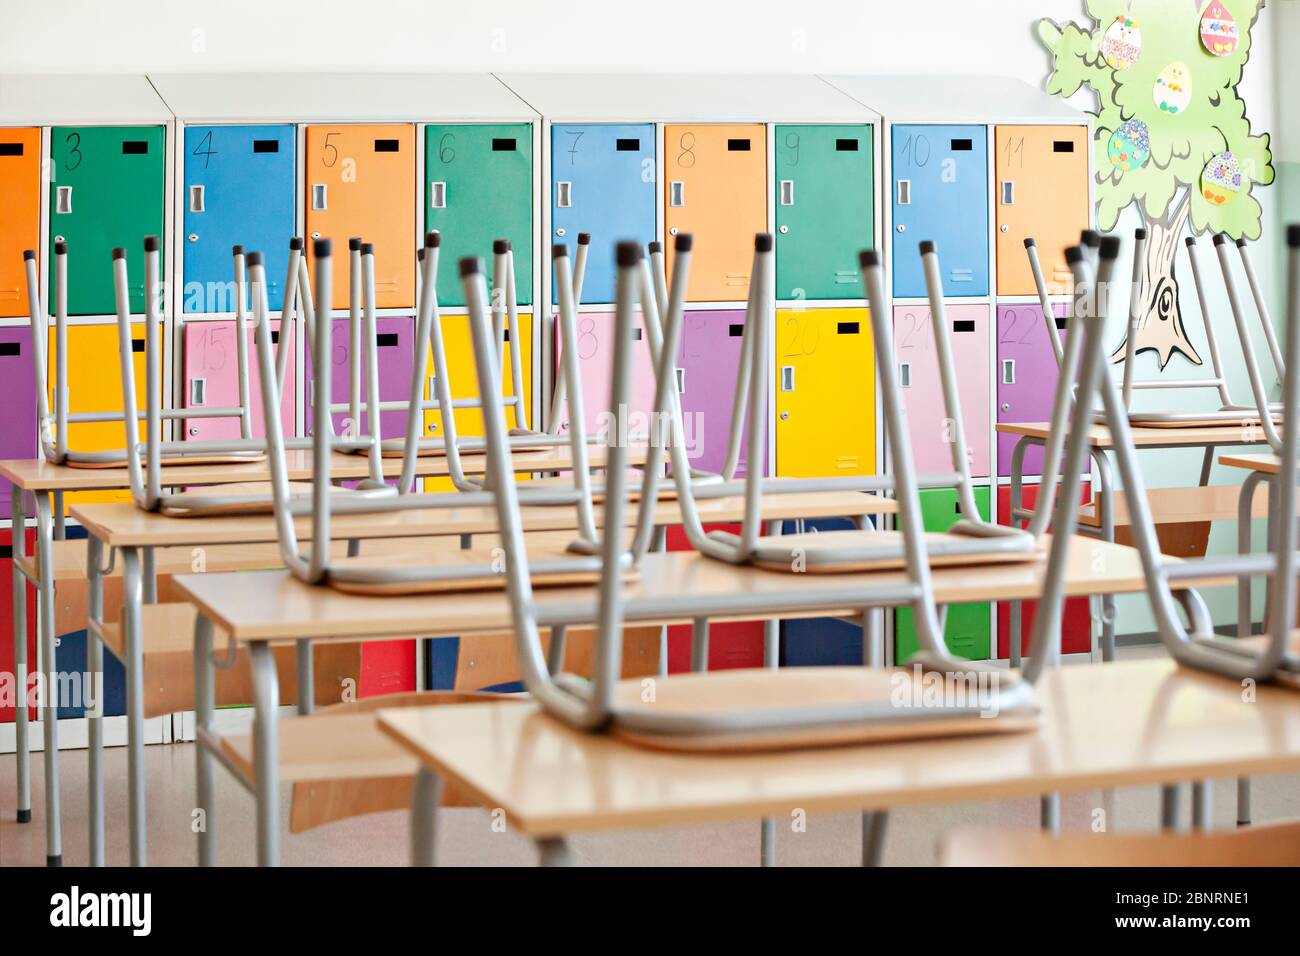 Modern empty classroom with colorful lockers and raised chairs on the tables - back to school Stock Photo